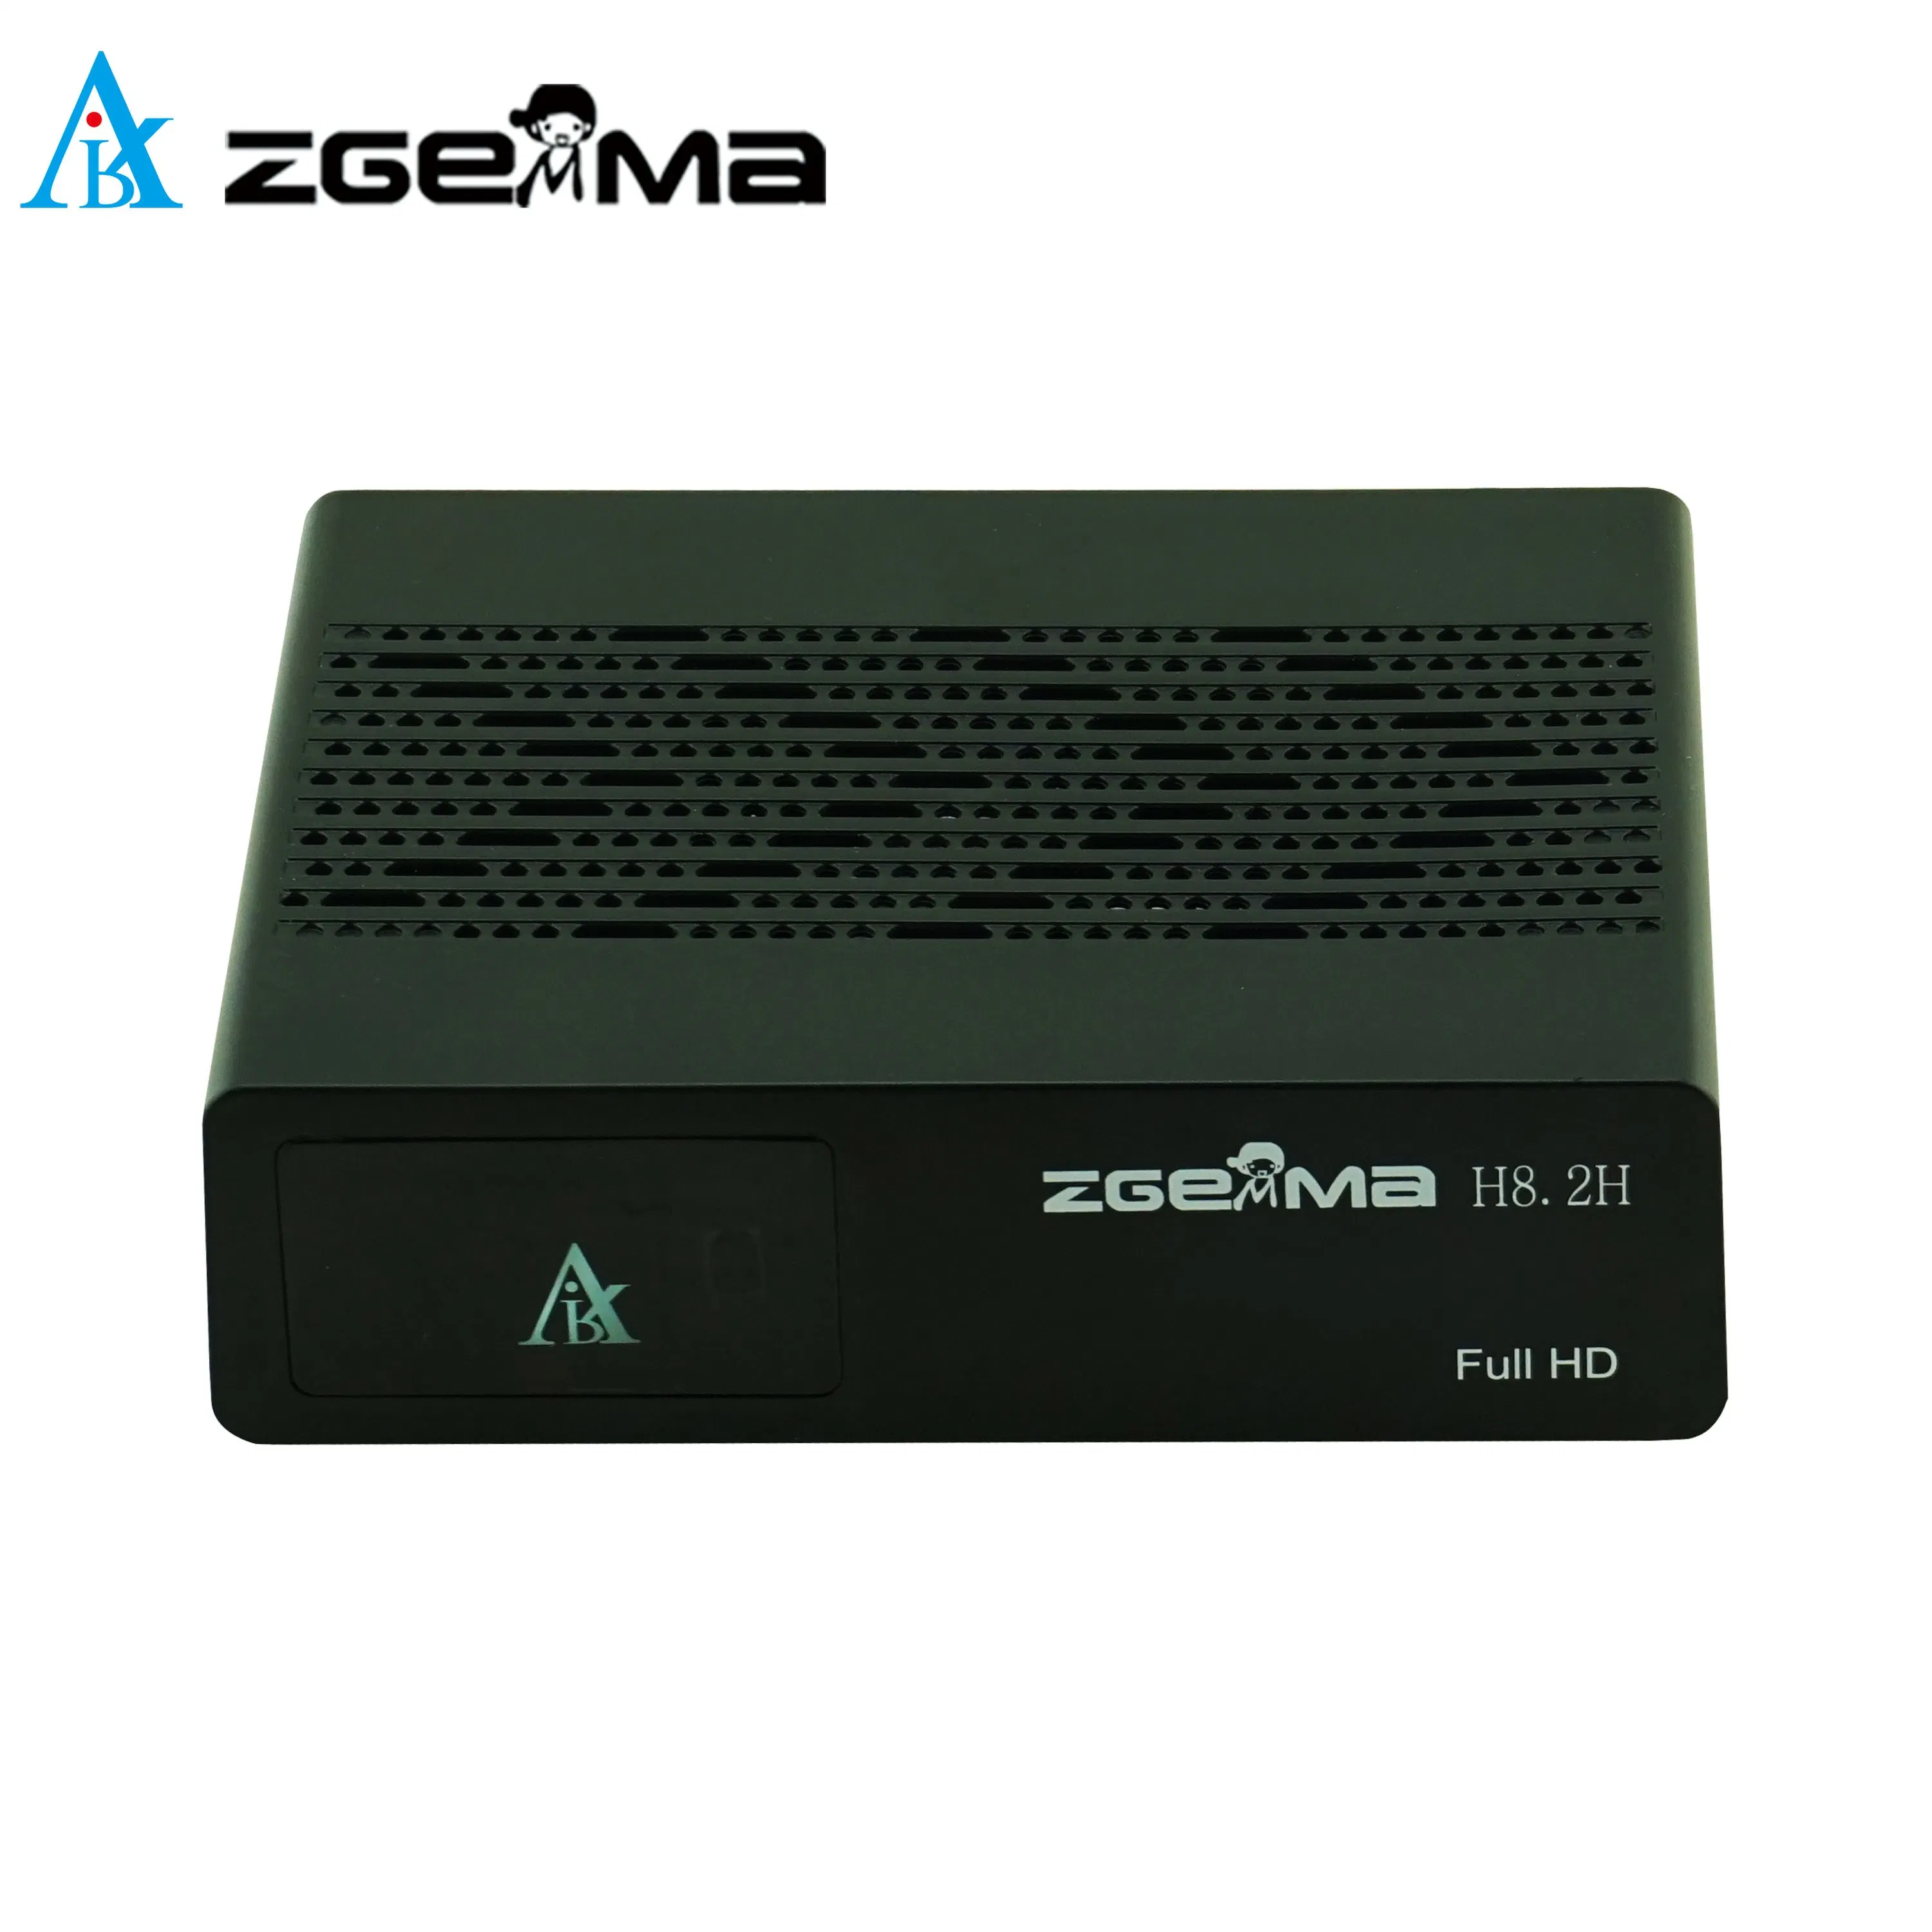 Upgrade Your TV Experience - Zgemma H8.2h Satellite Receiver with Built-in DVB-S2X + DVB-T2/C Tuners